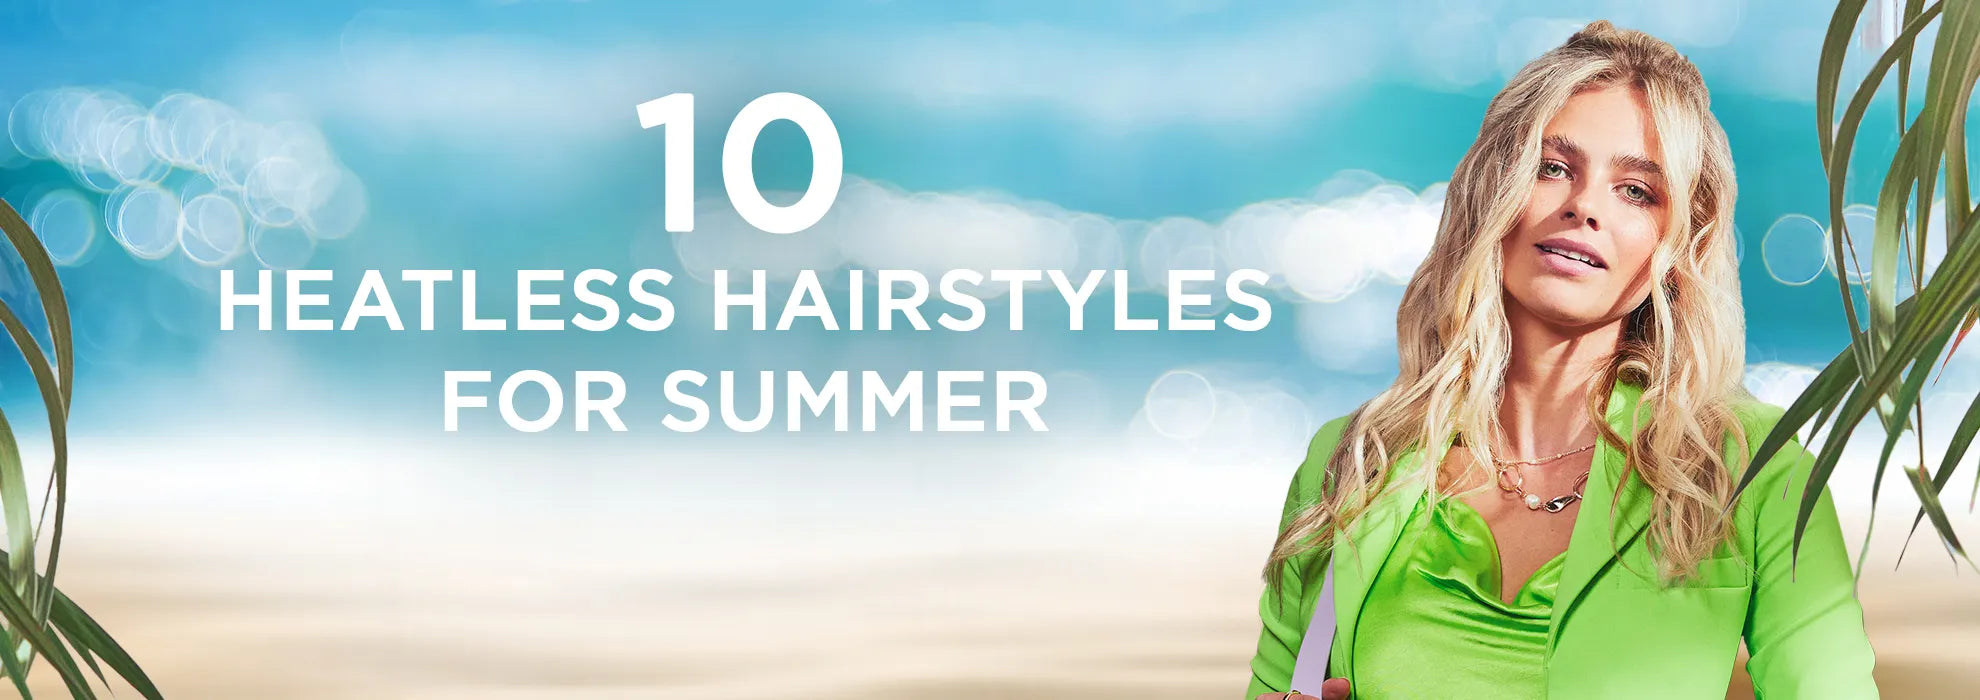 A beach background with a blonde haired model and the text '10 heatless hairstyles for summer'.